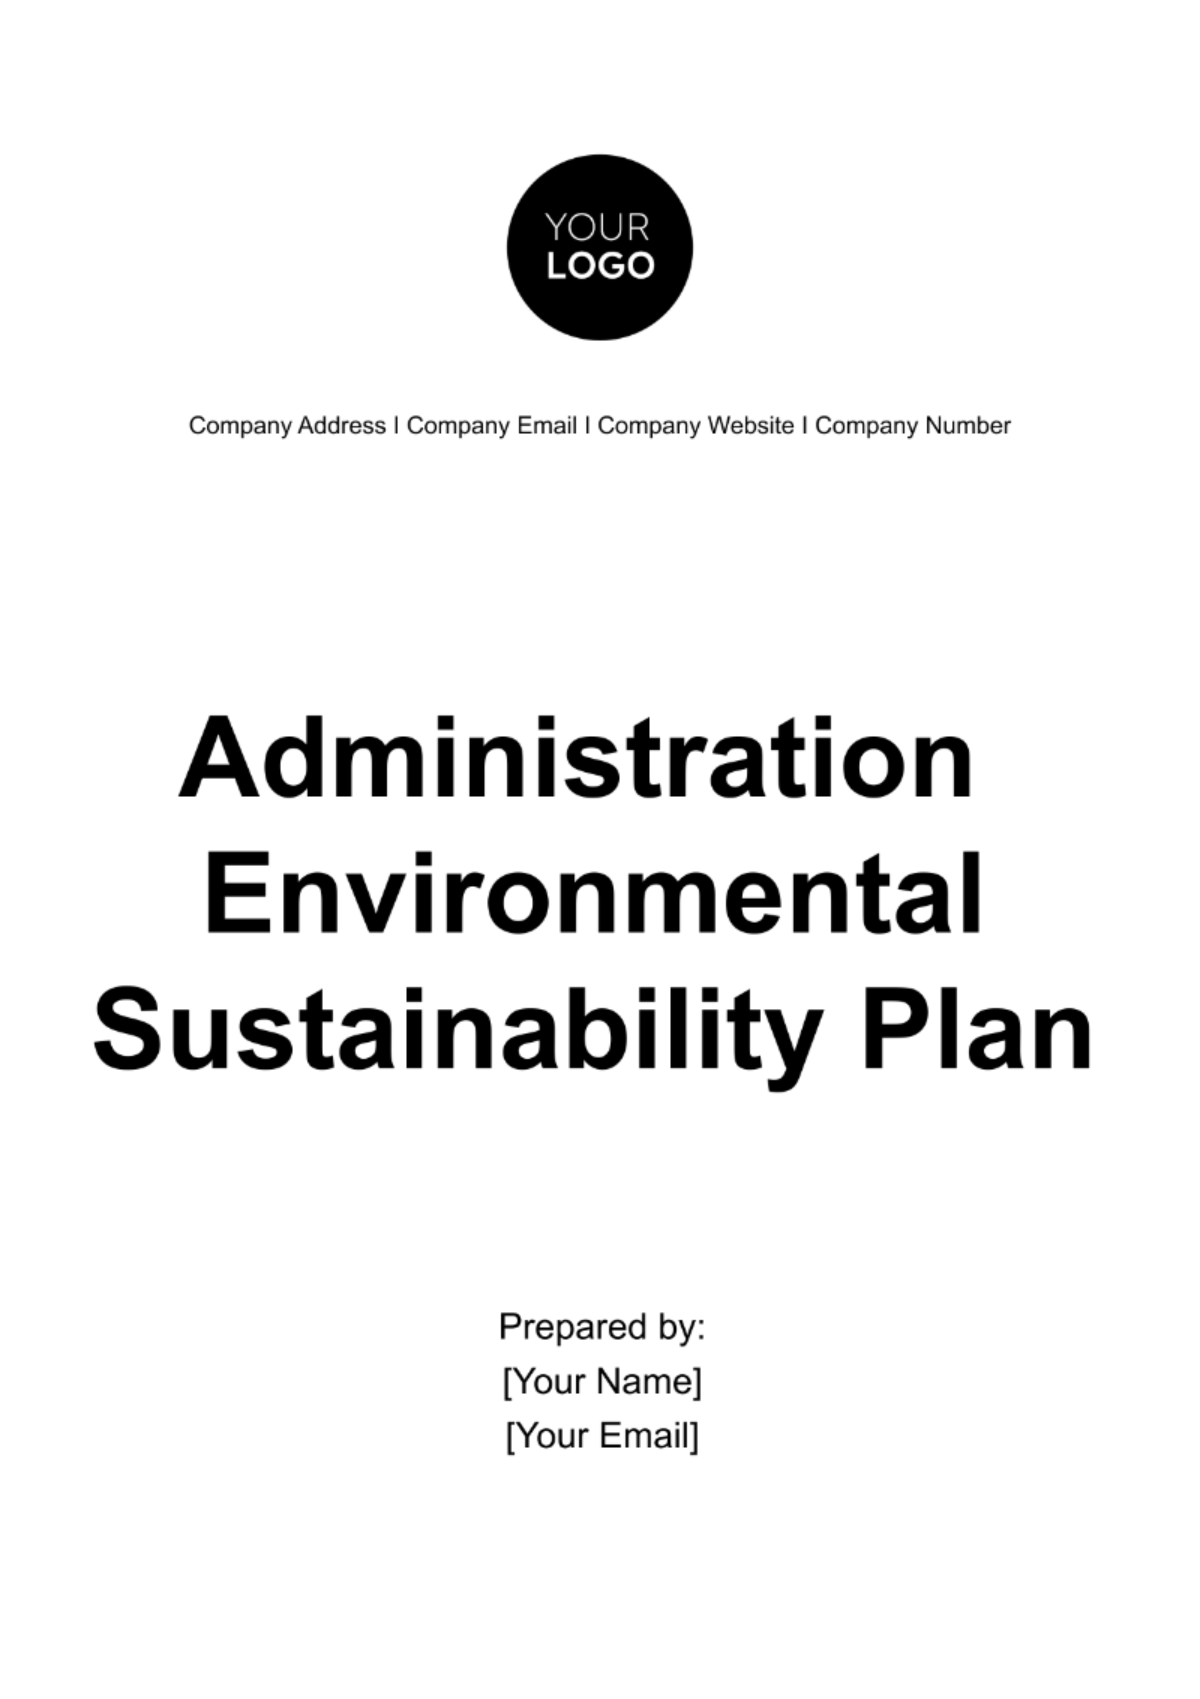 Administration Environmental Sustainability Plan Template